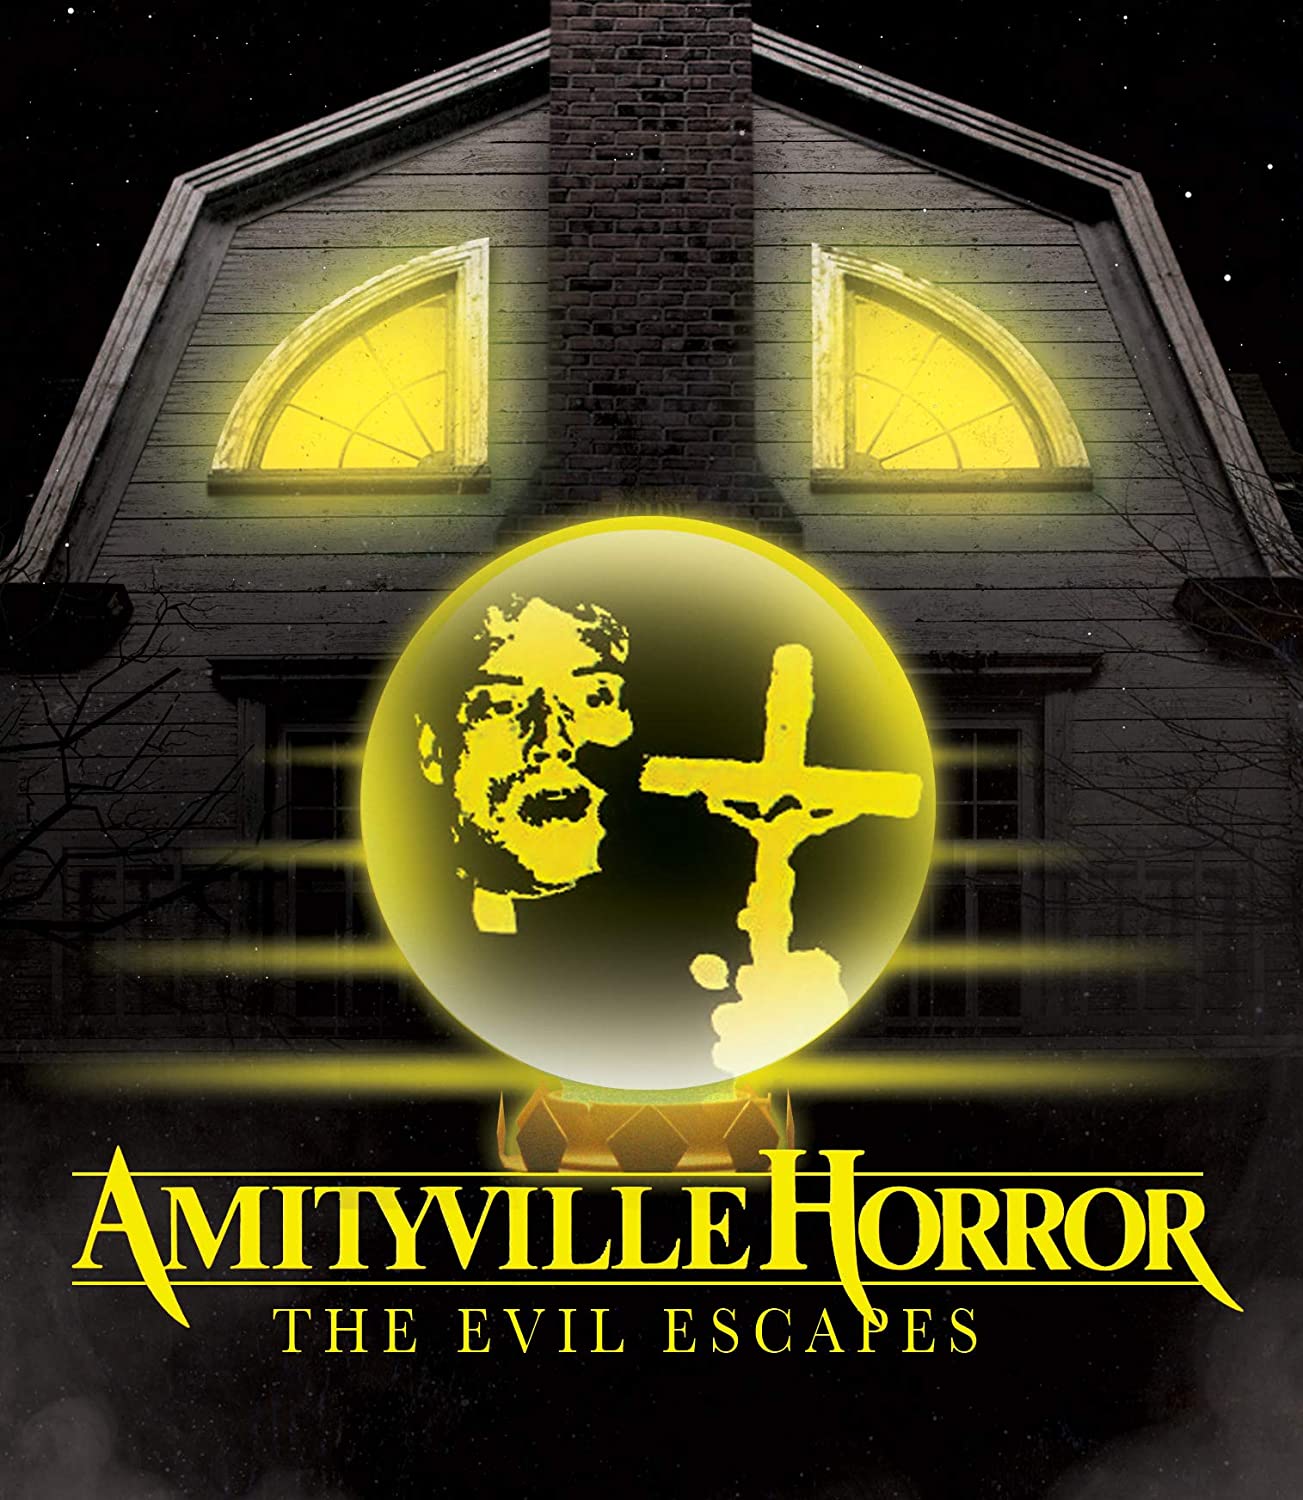 Amityville: The Evil Escapes Blu-Ray Blu-Ray